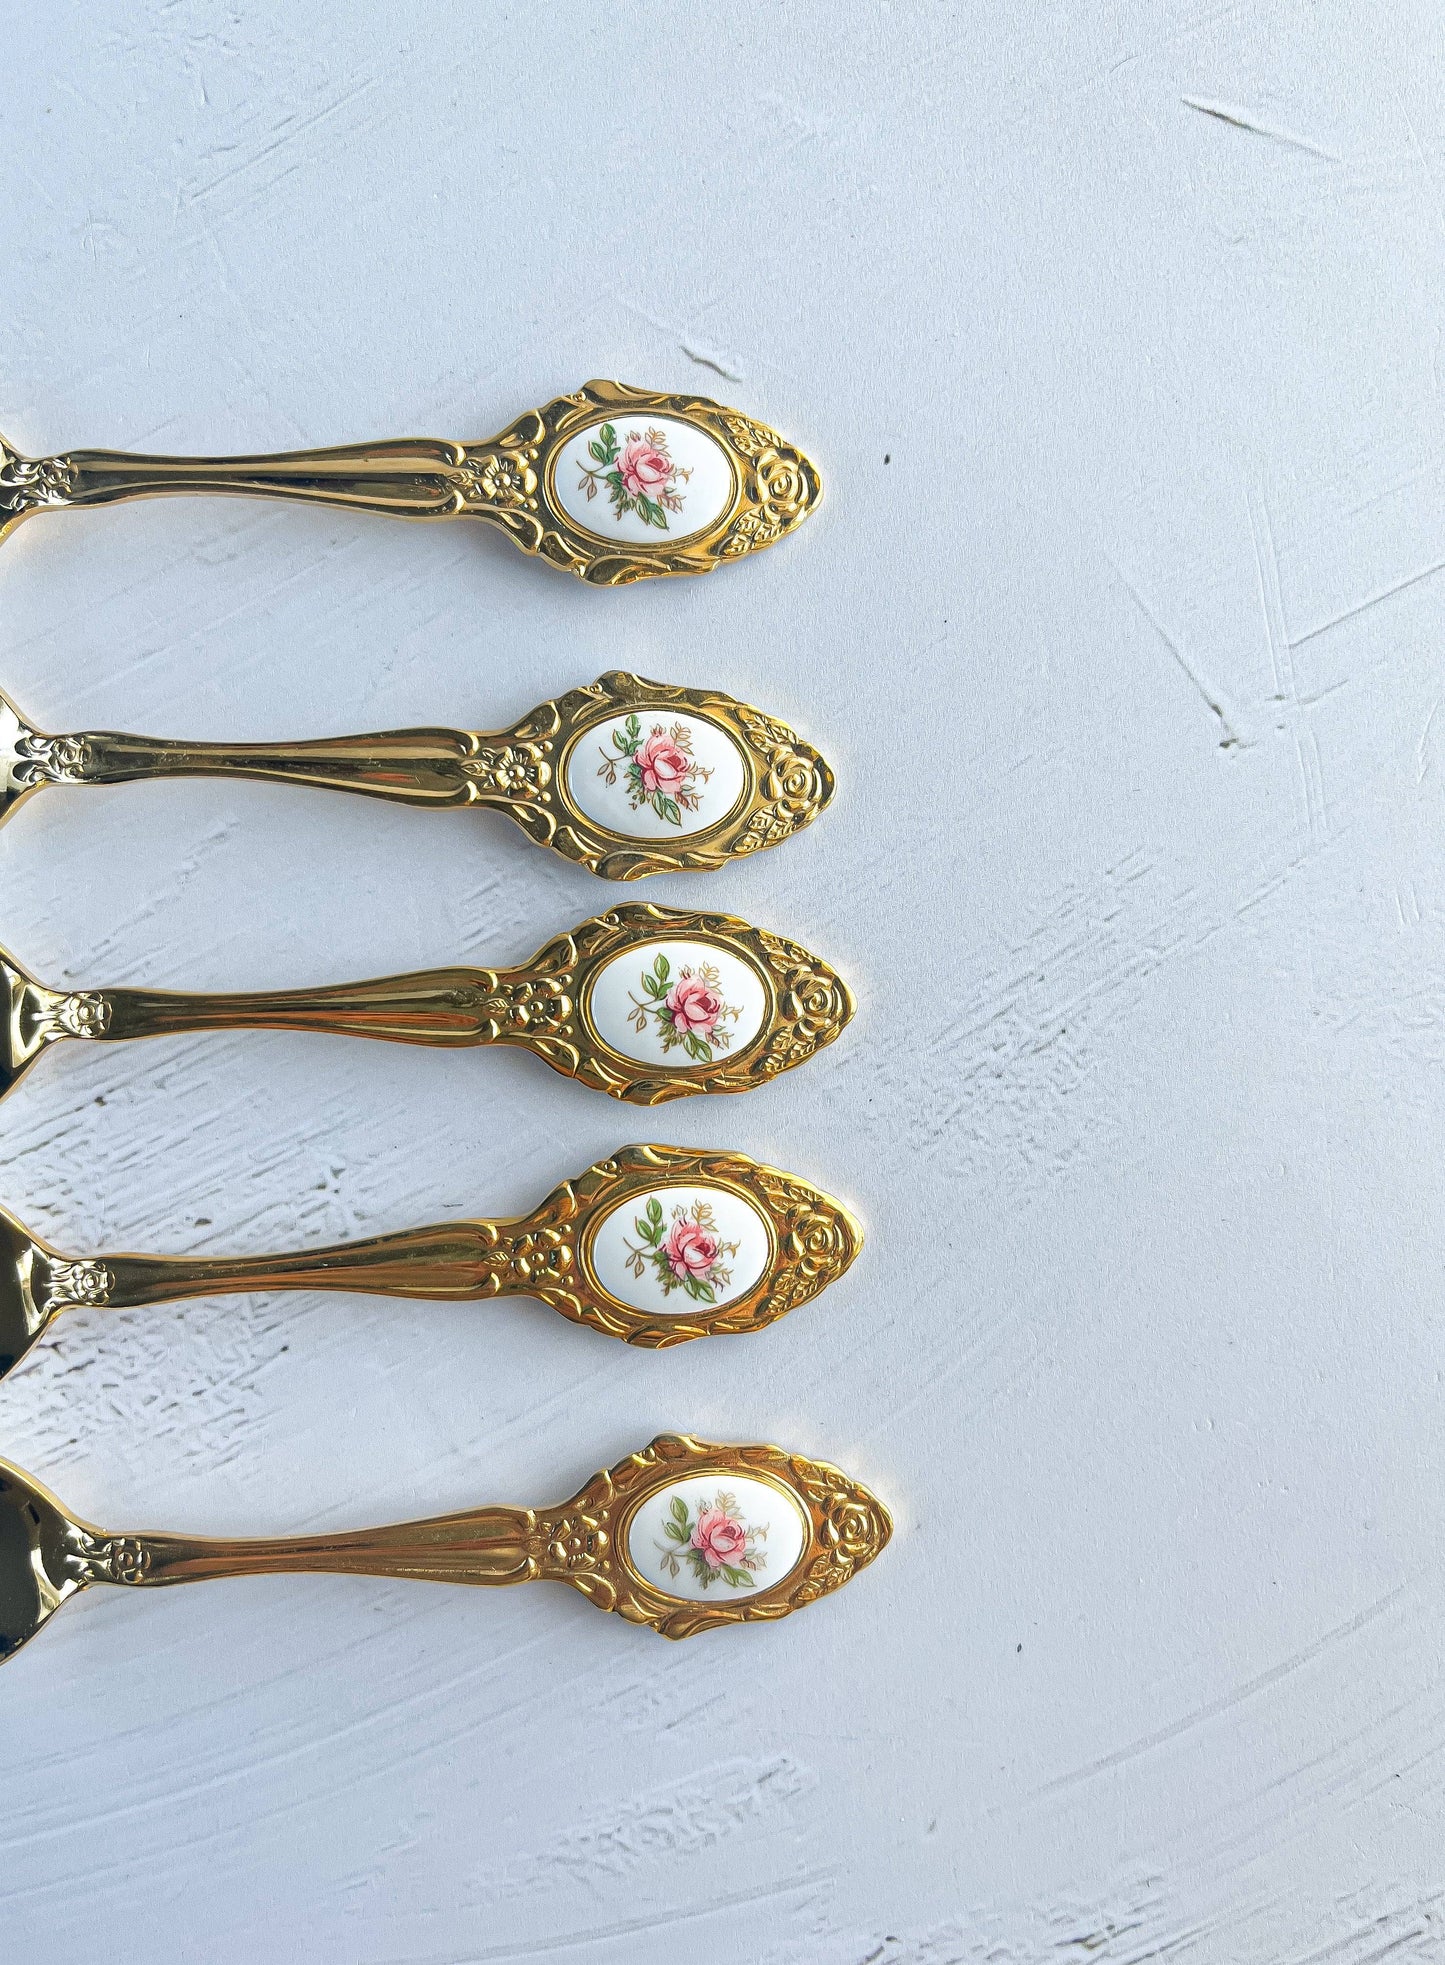 Eetrite 24k Gold-Plated Teaspoon with Pink Floral Medallion - SOSC Home